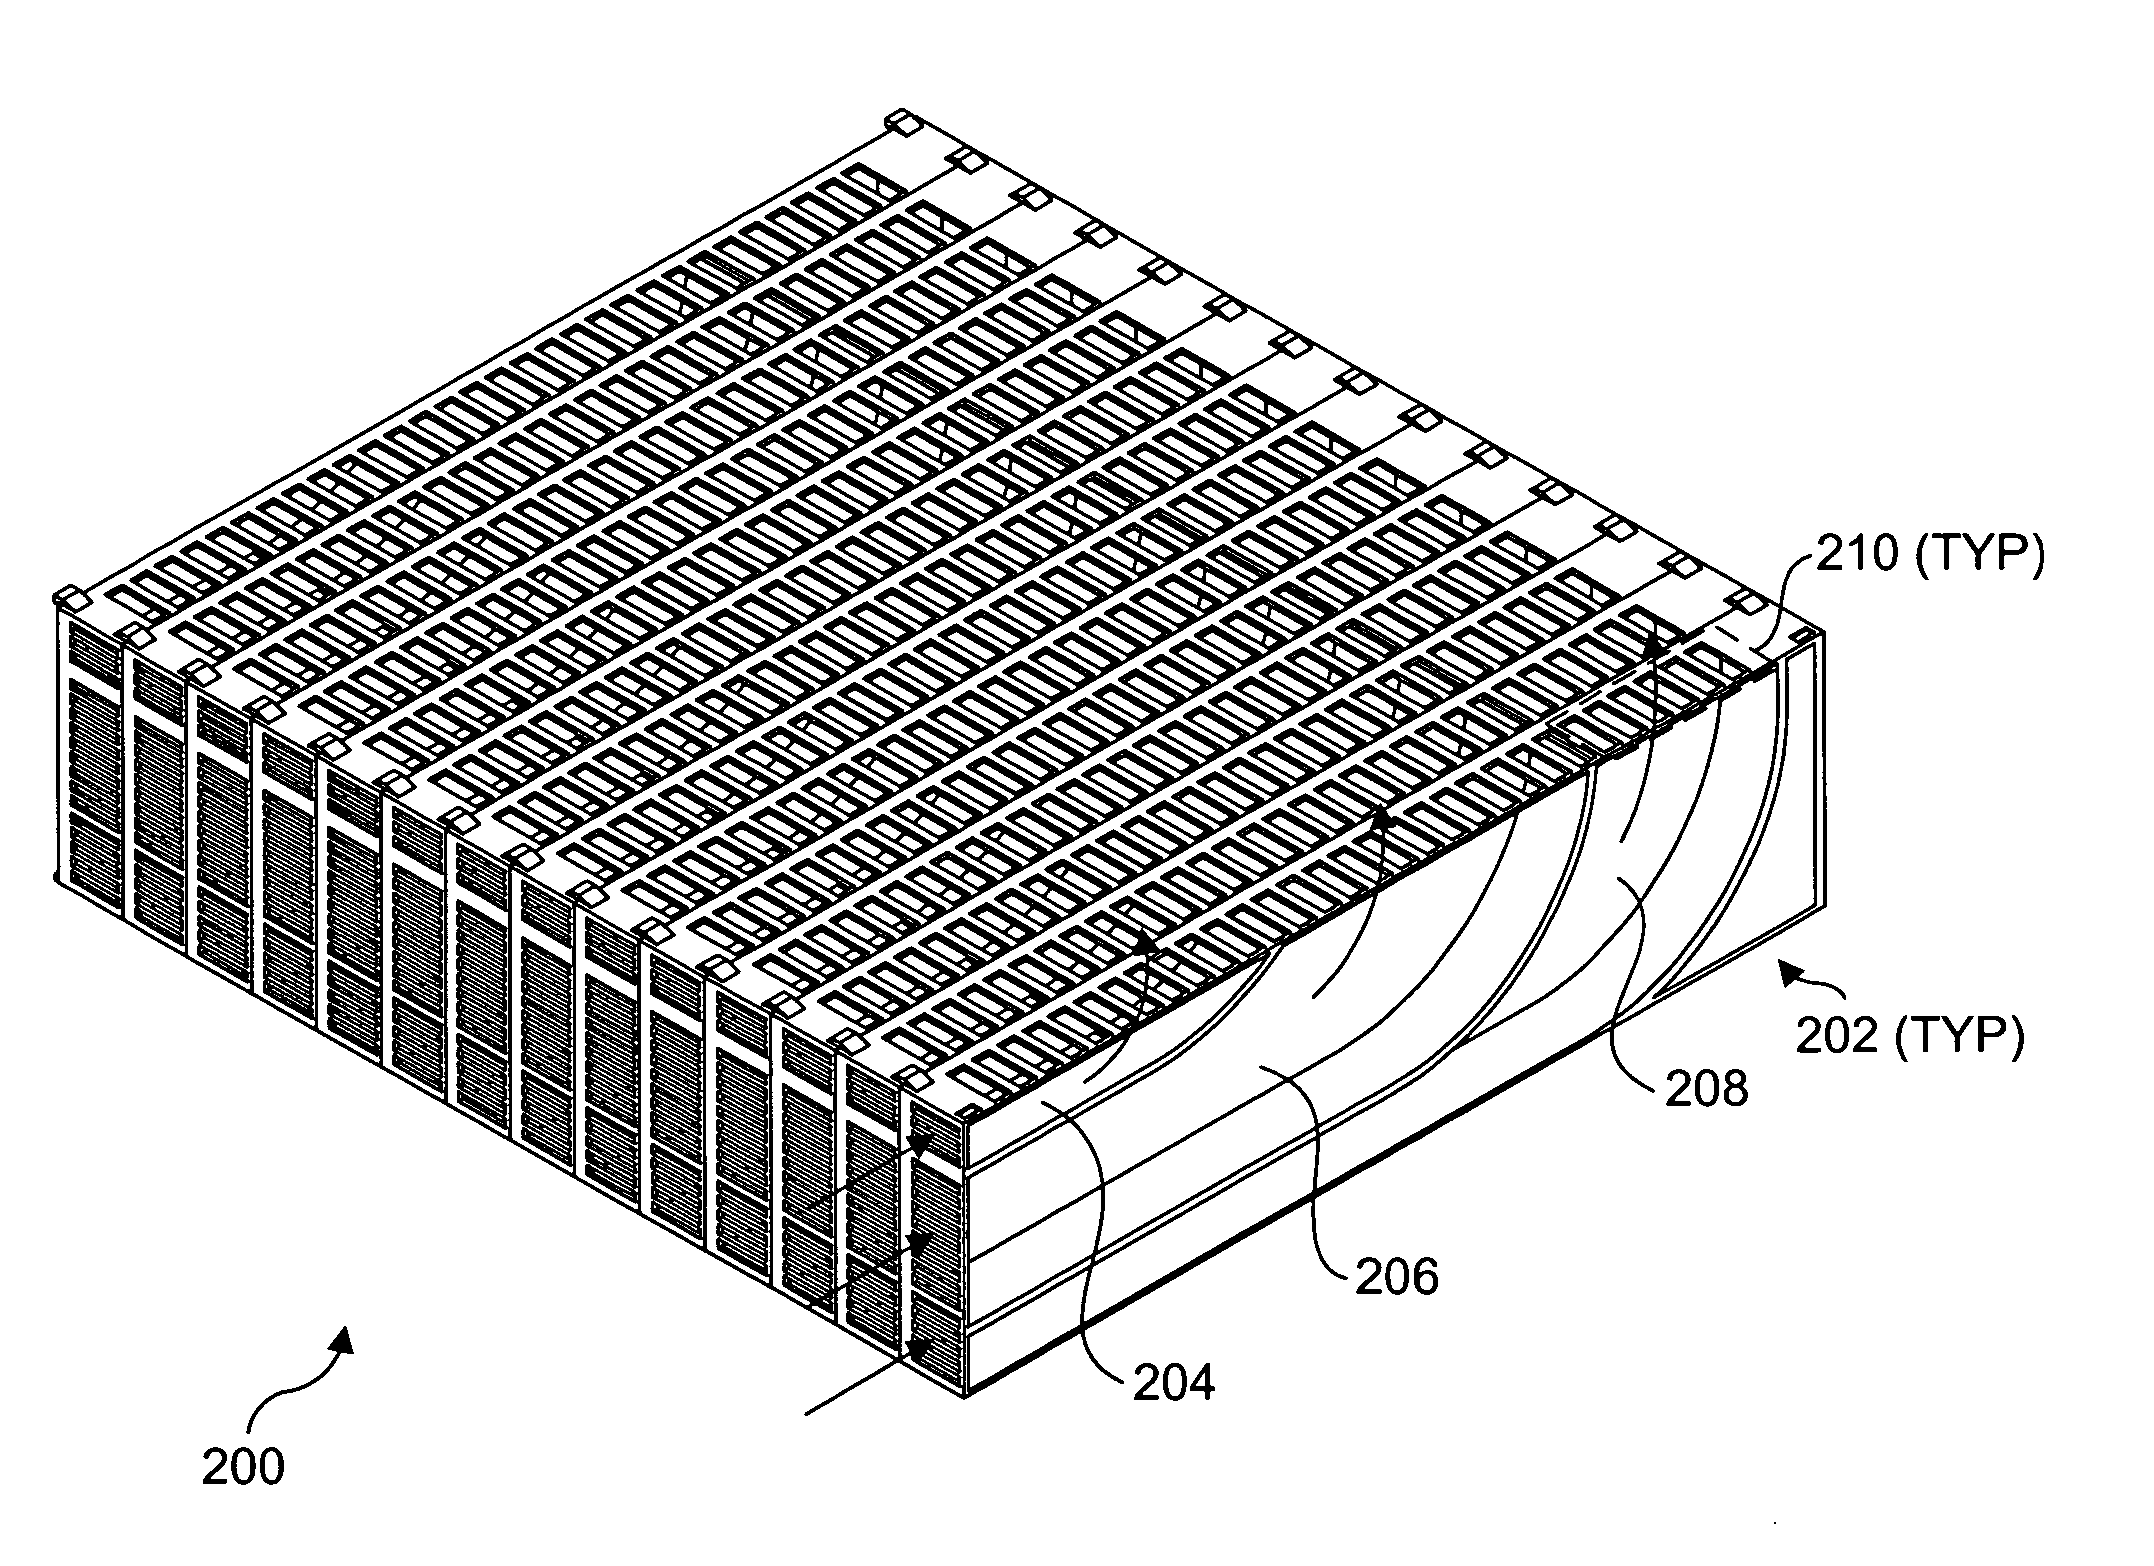 Reconfigurable airflow director for modular blade chassis